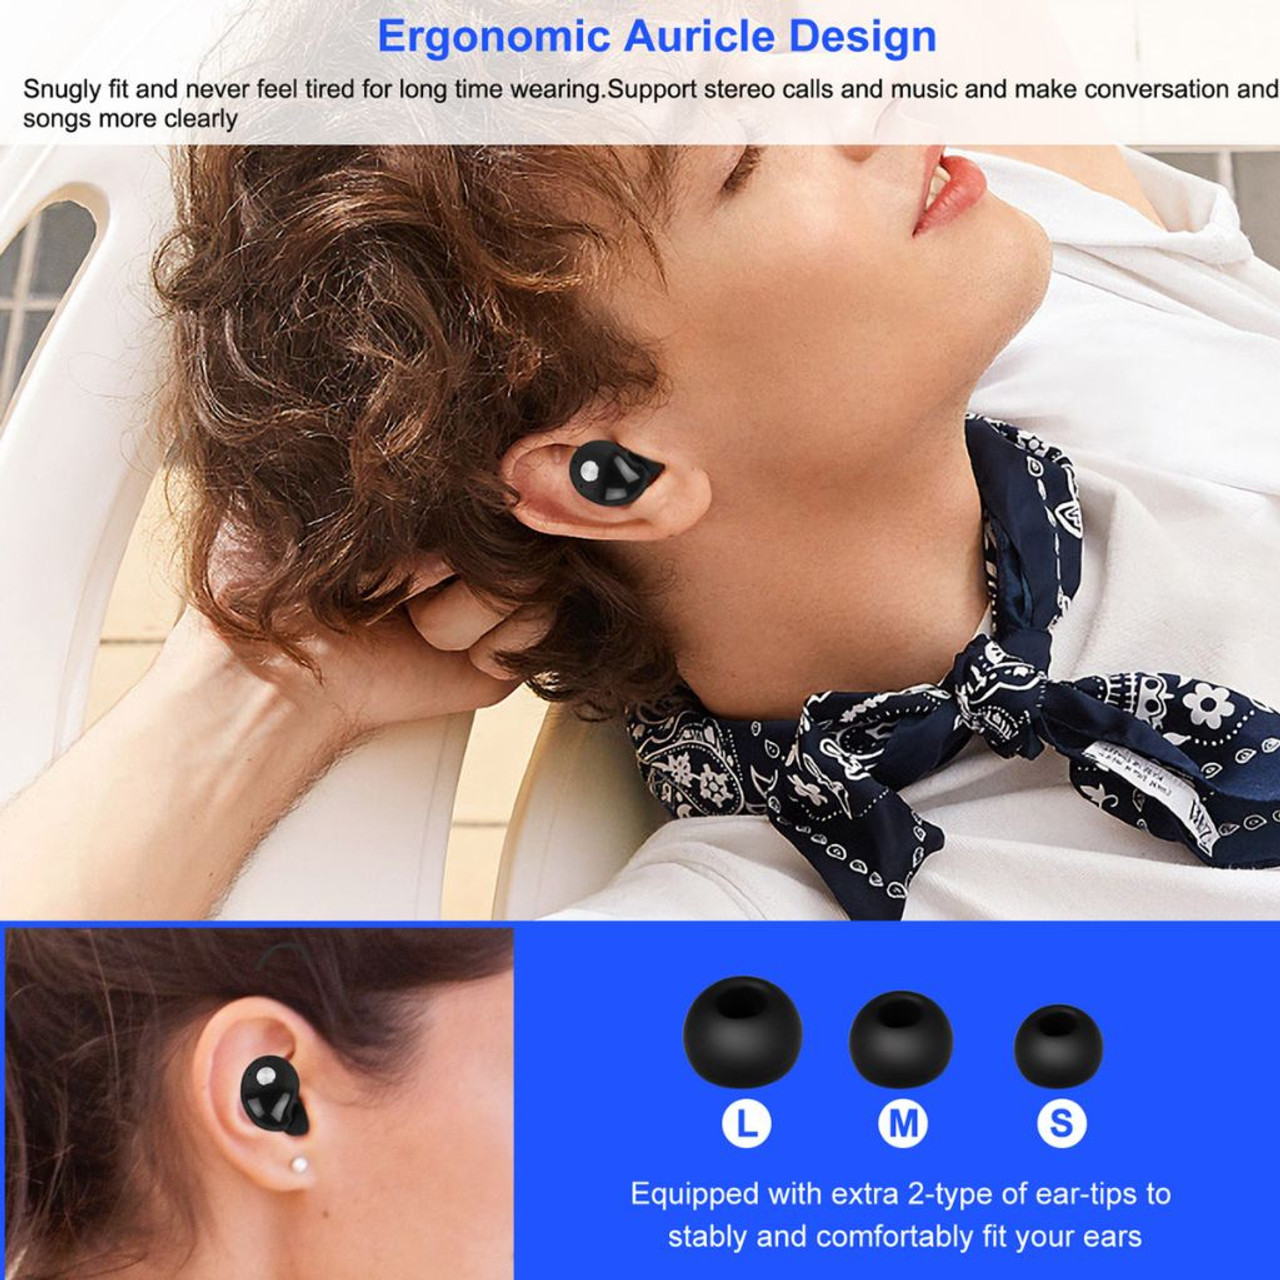 TWS True Wireless V4.2 Earbuds product image